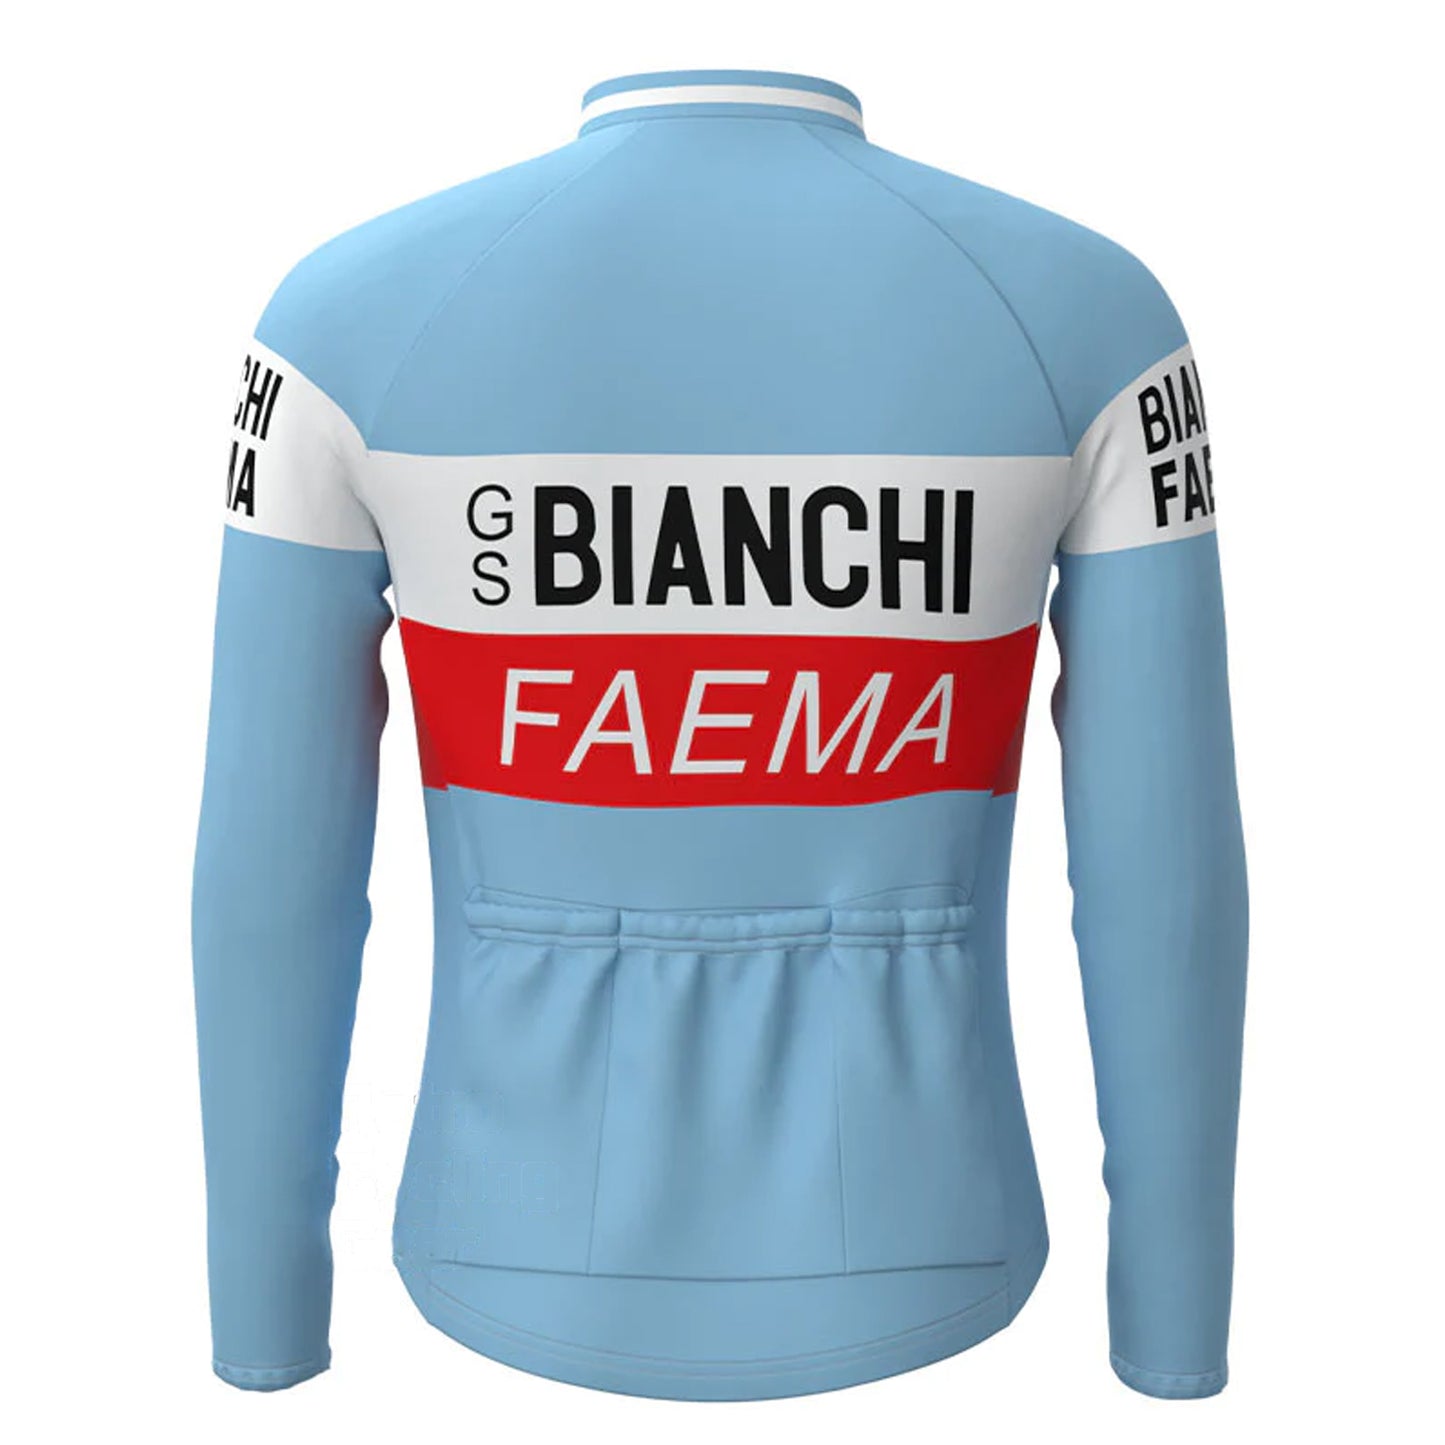 BIANCHI Red Blue Vintage Long Sleeve Cycling Jersey Matching Set